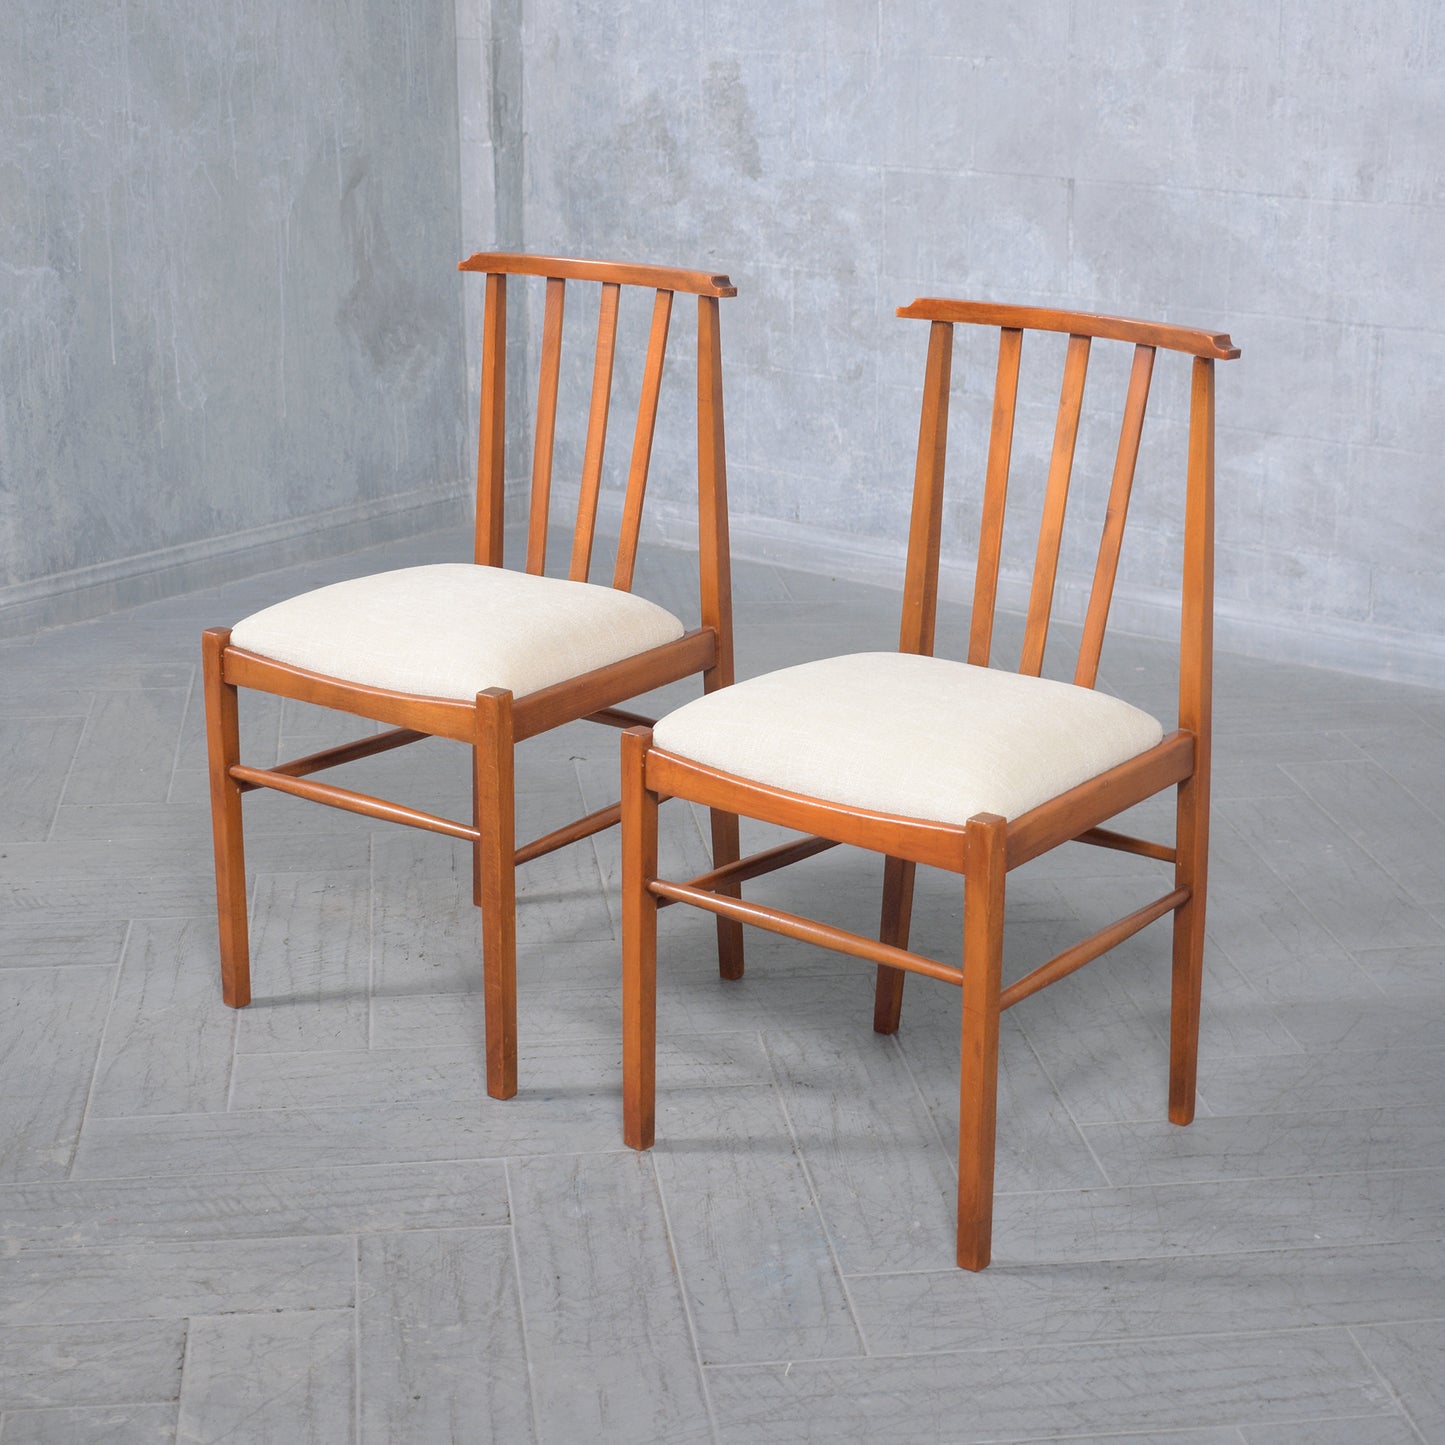 Eight 1960s Hand-Crafted Solid Maple Wood Mid Century Modern Dining Chairs